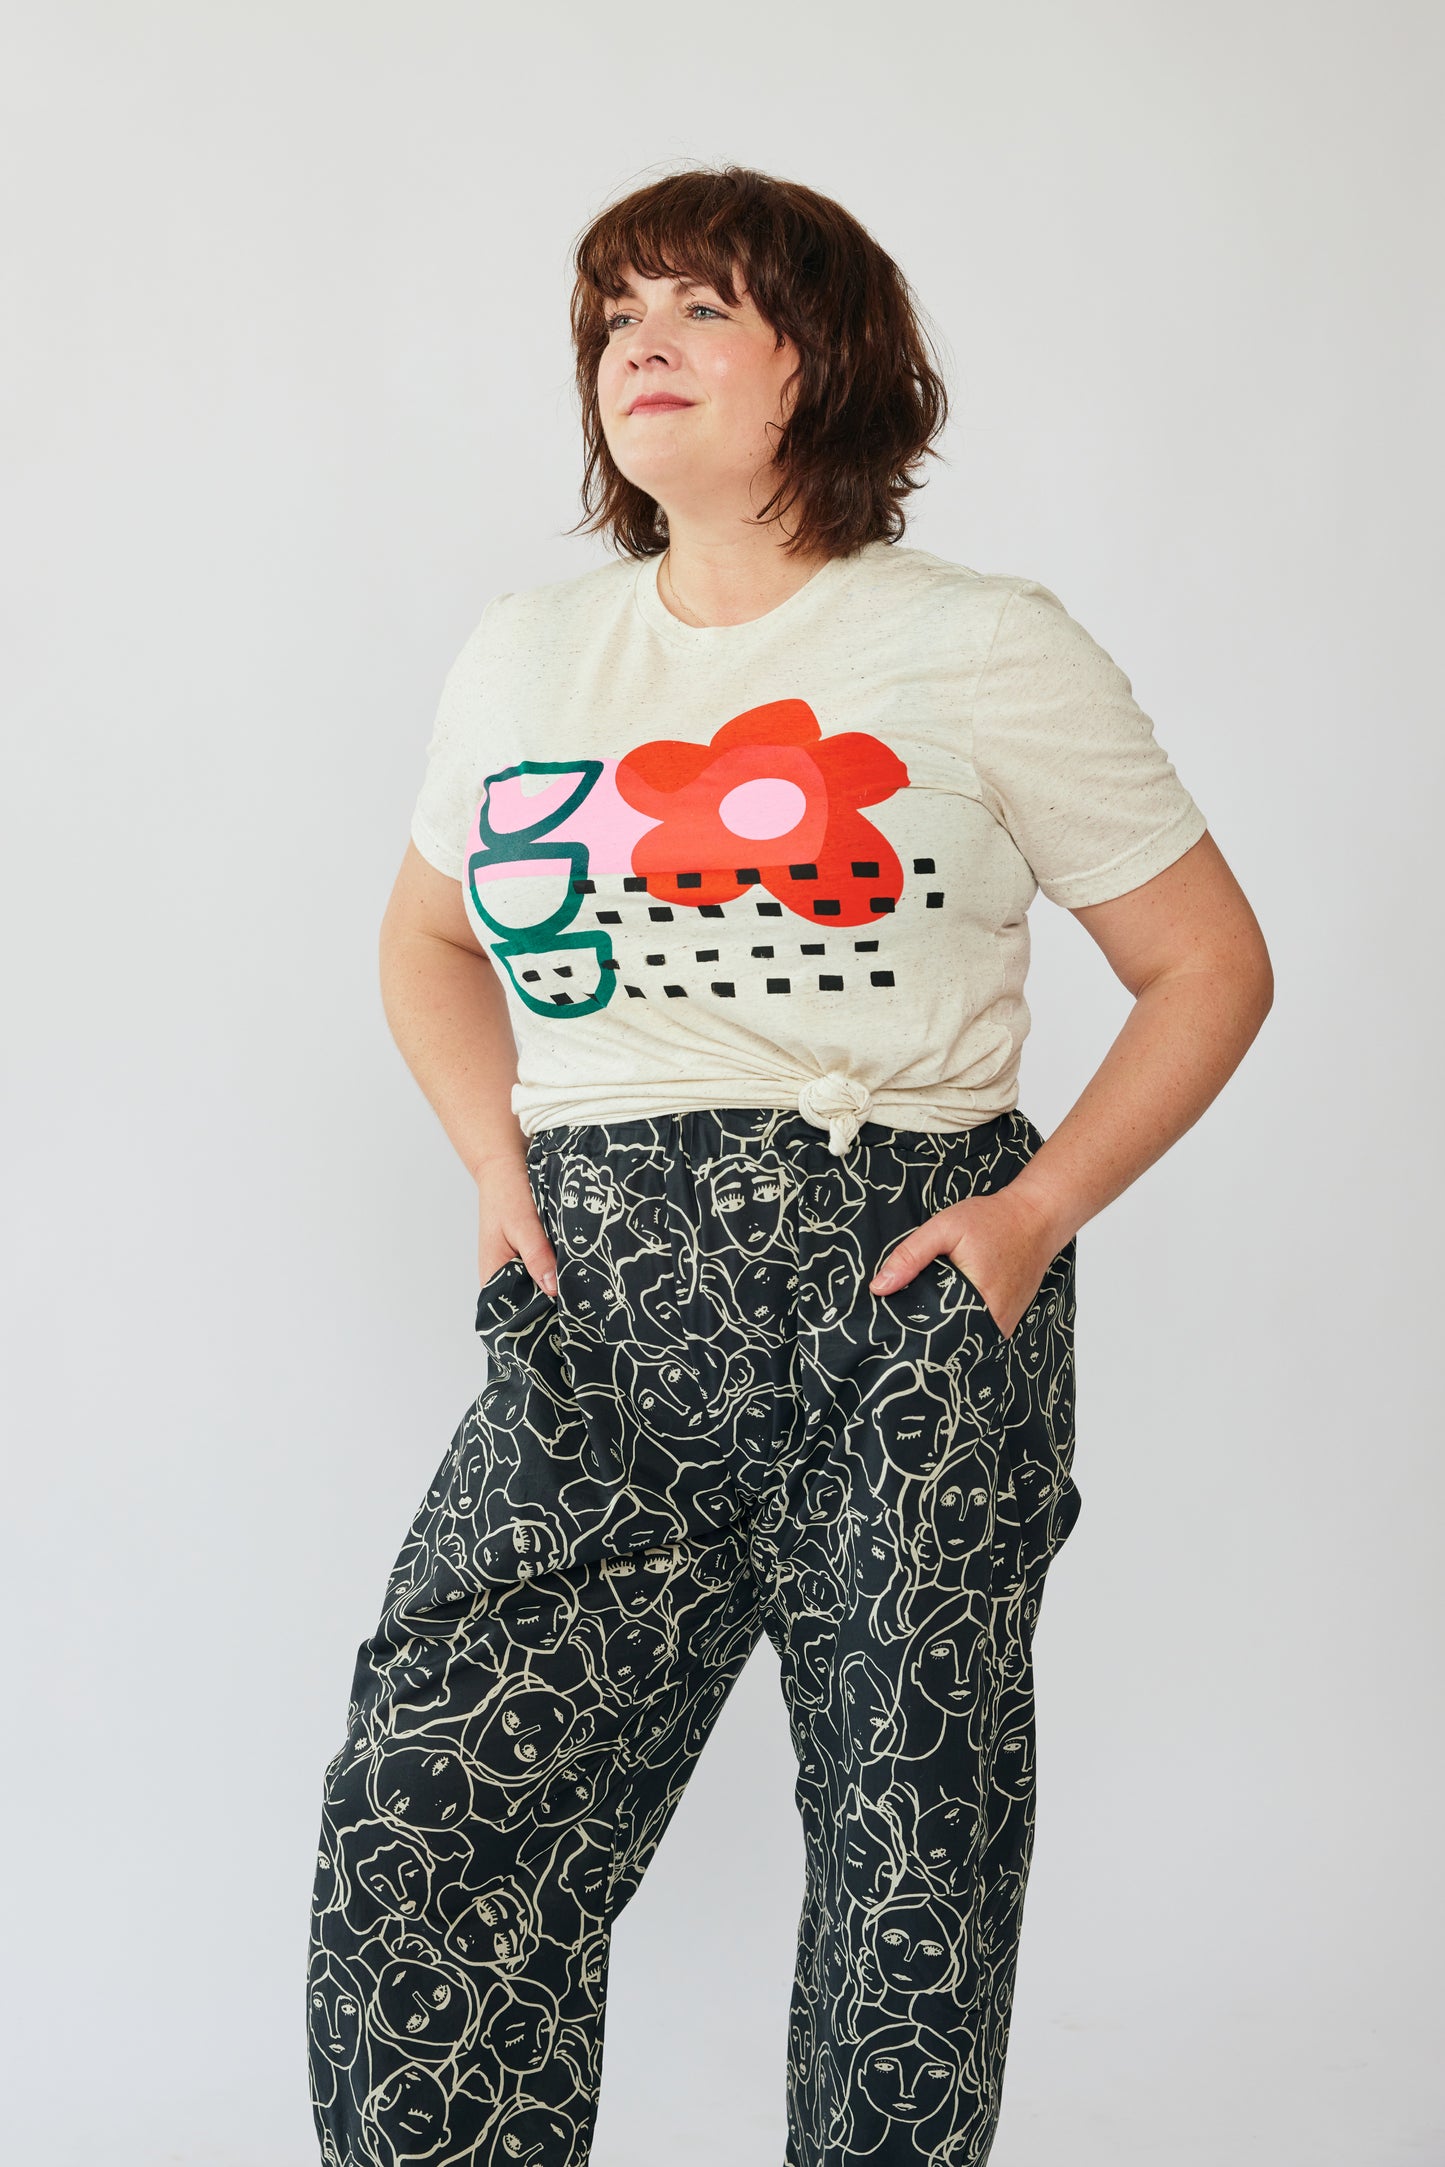 Grown-up Balloon Pants - Oh Lady